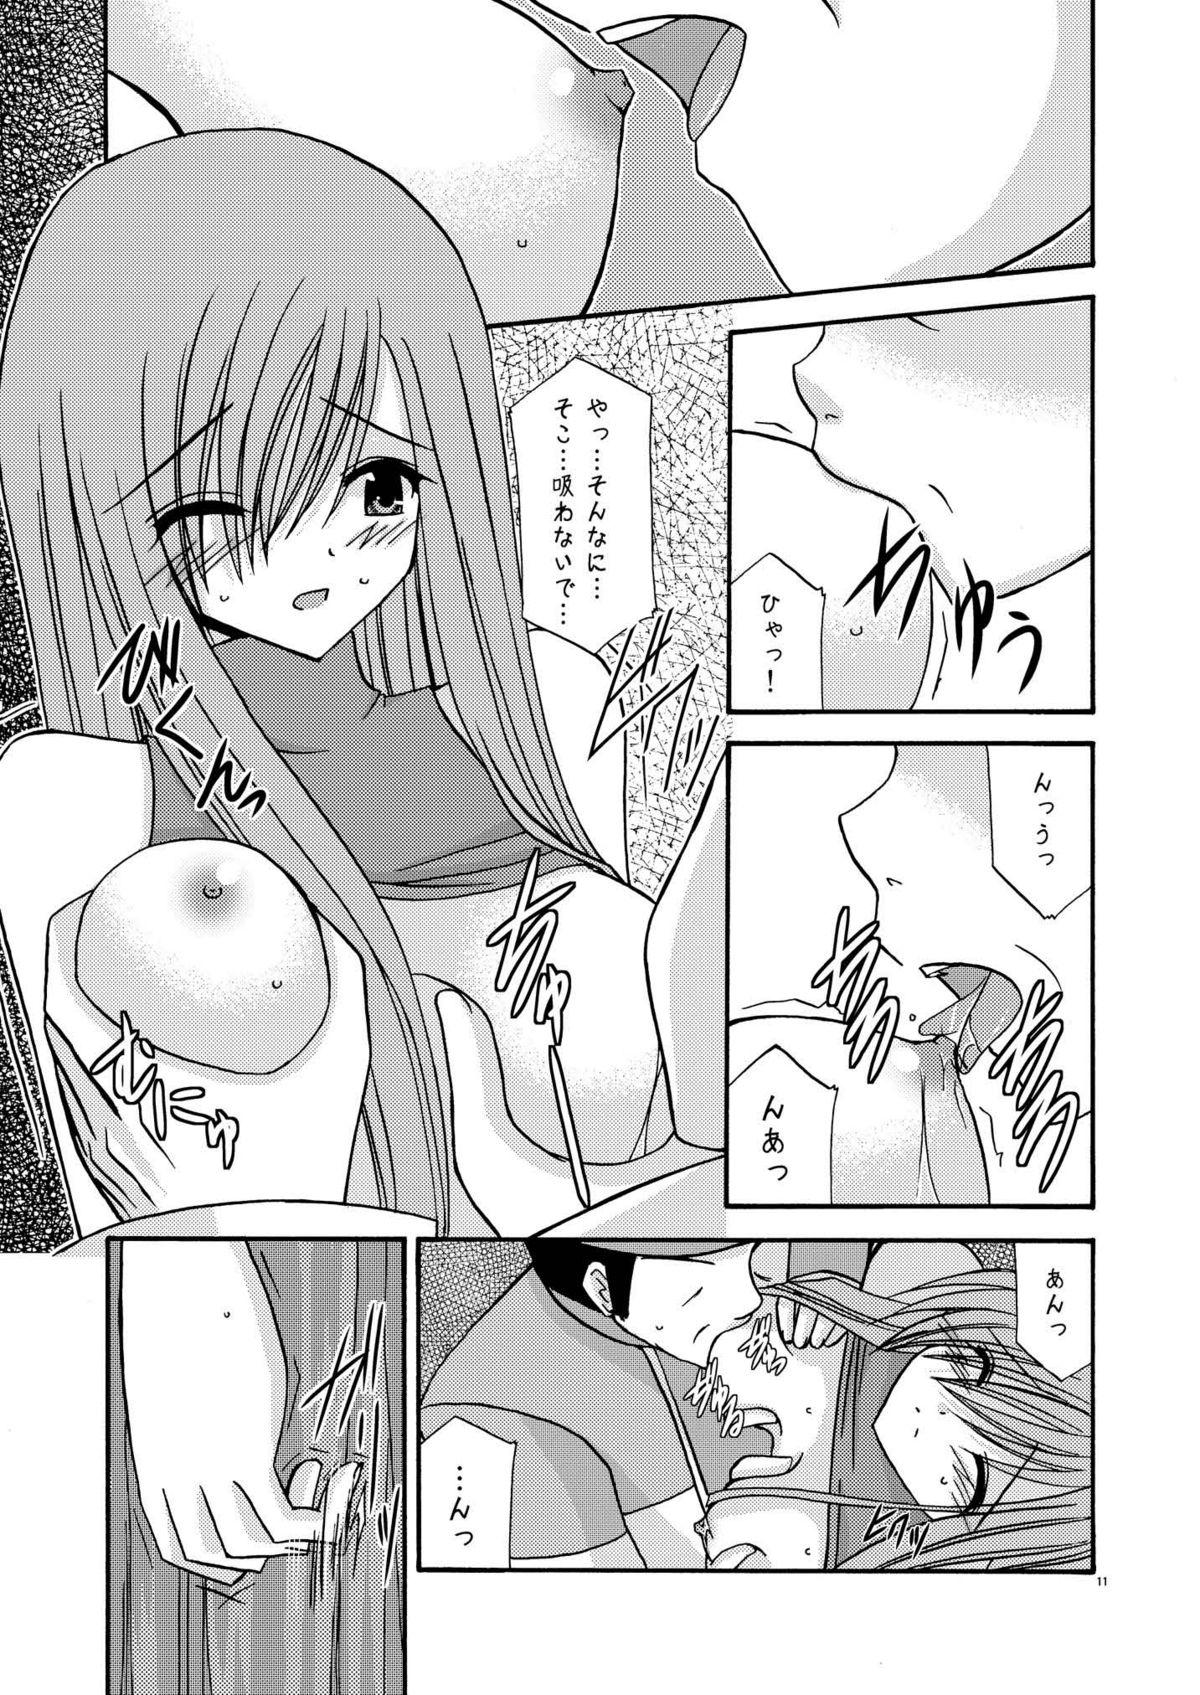 Nalgas Tales of Phallus vol.2 - Tales of the abyss Facesitting - Page 11